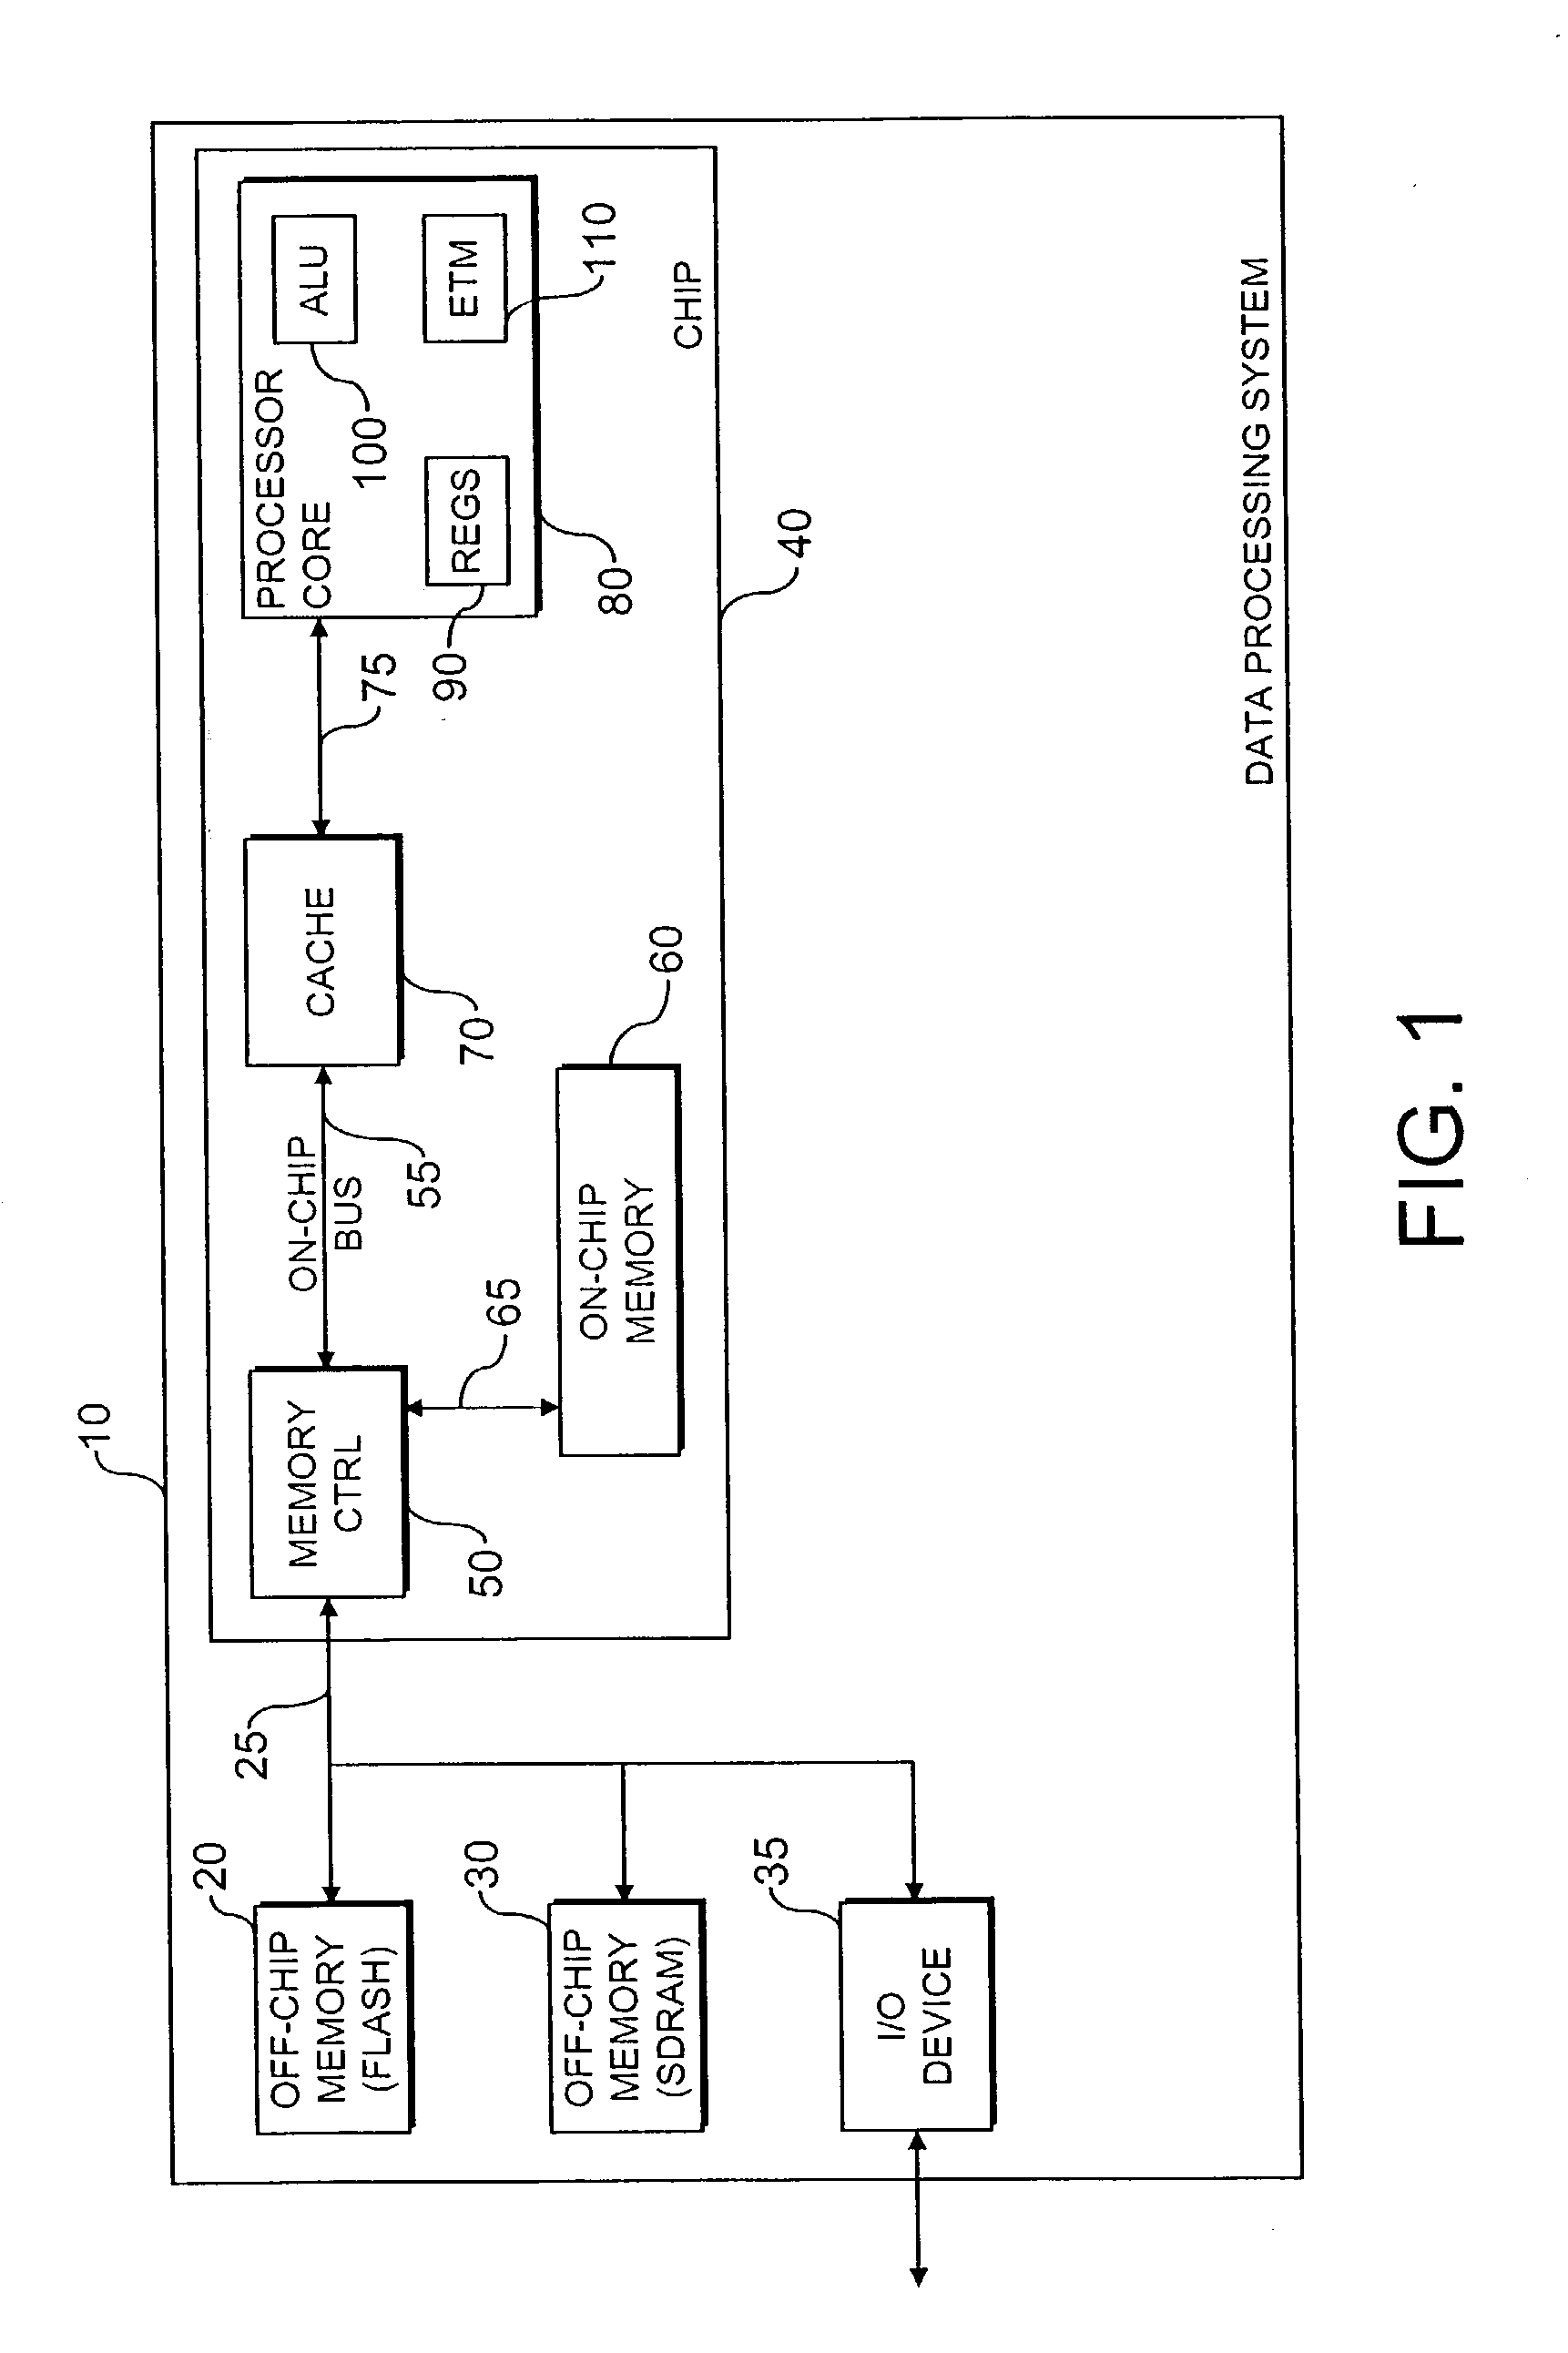 Analysis of the performance of a portion of a data processing system